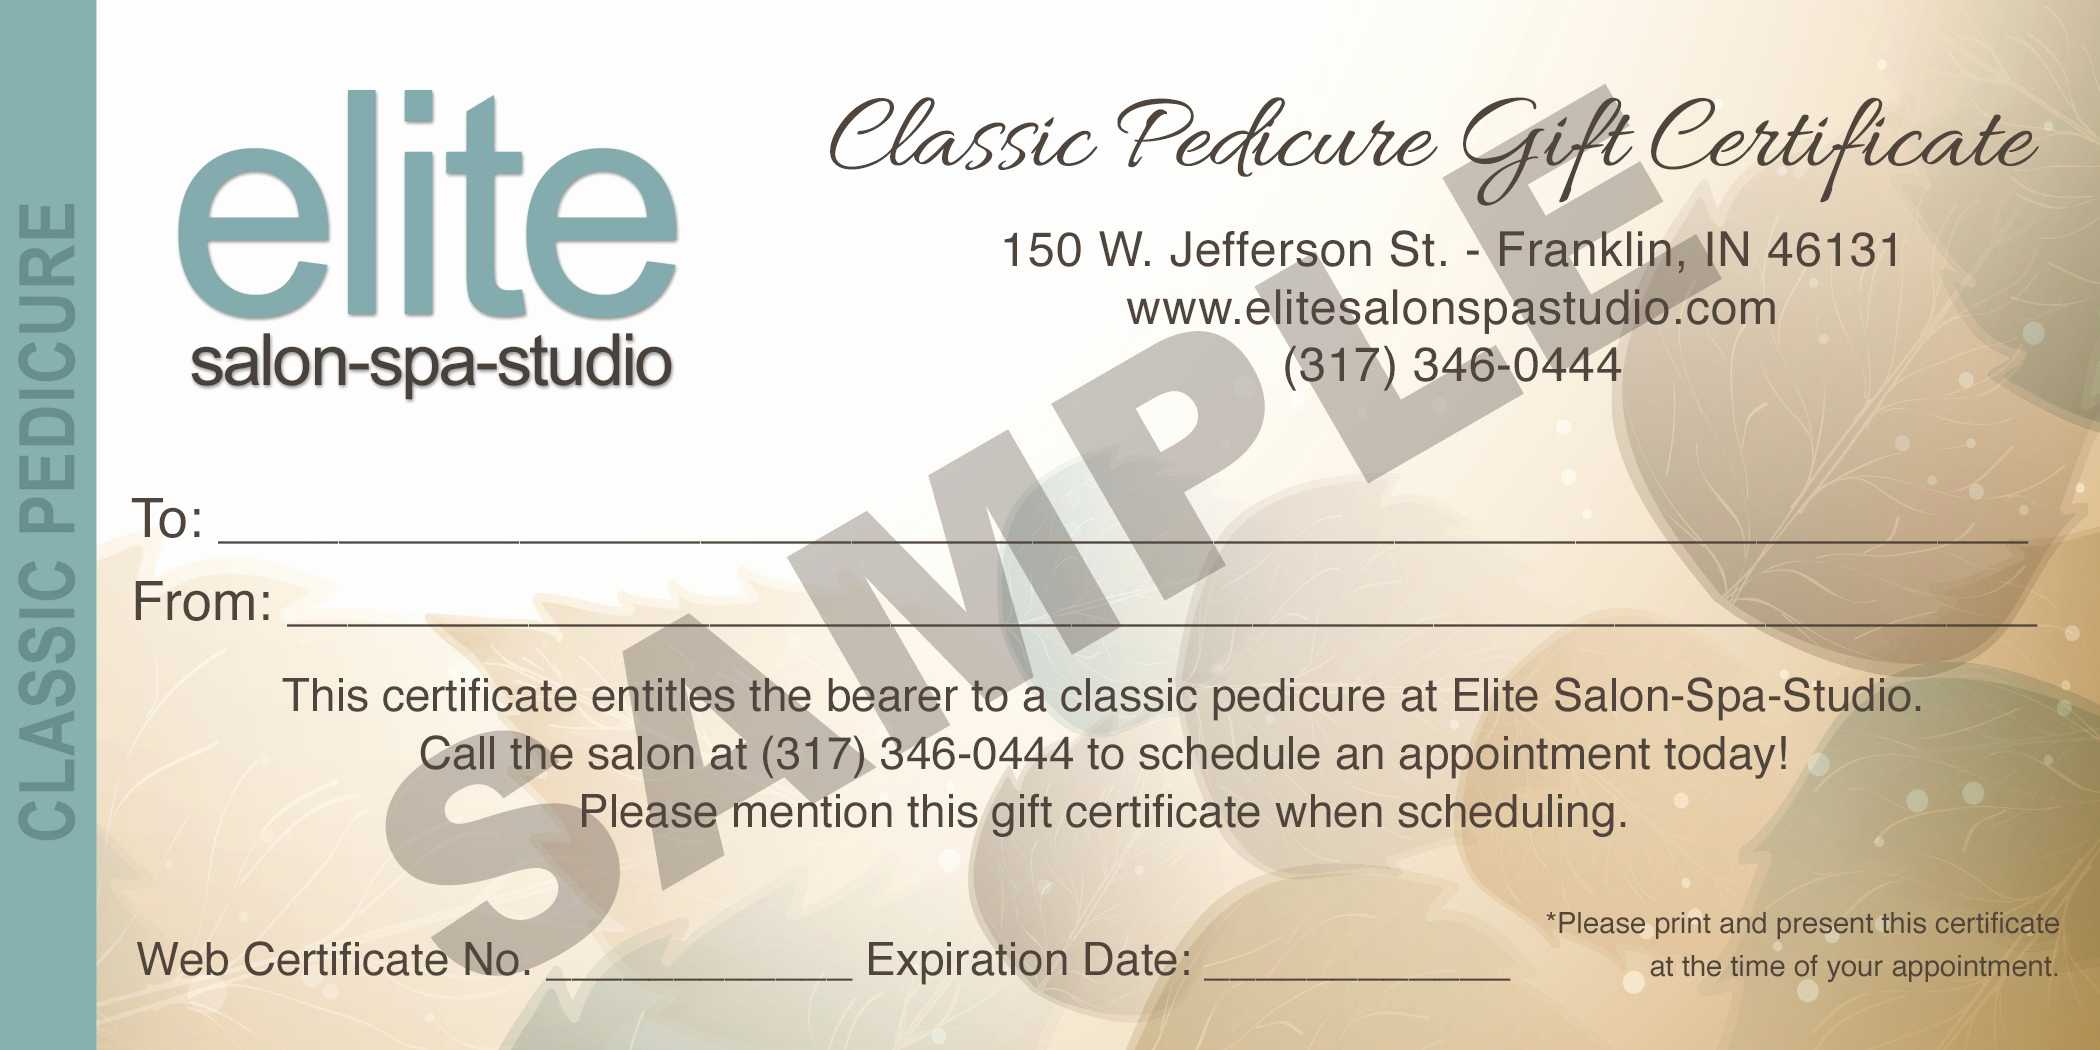 Spa Gift Certificate Template Word Salon Templates Pertaining To This Certificate Entitles The Bearer To Template